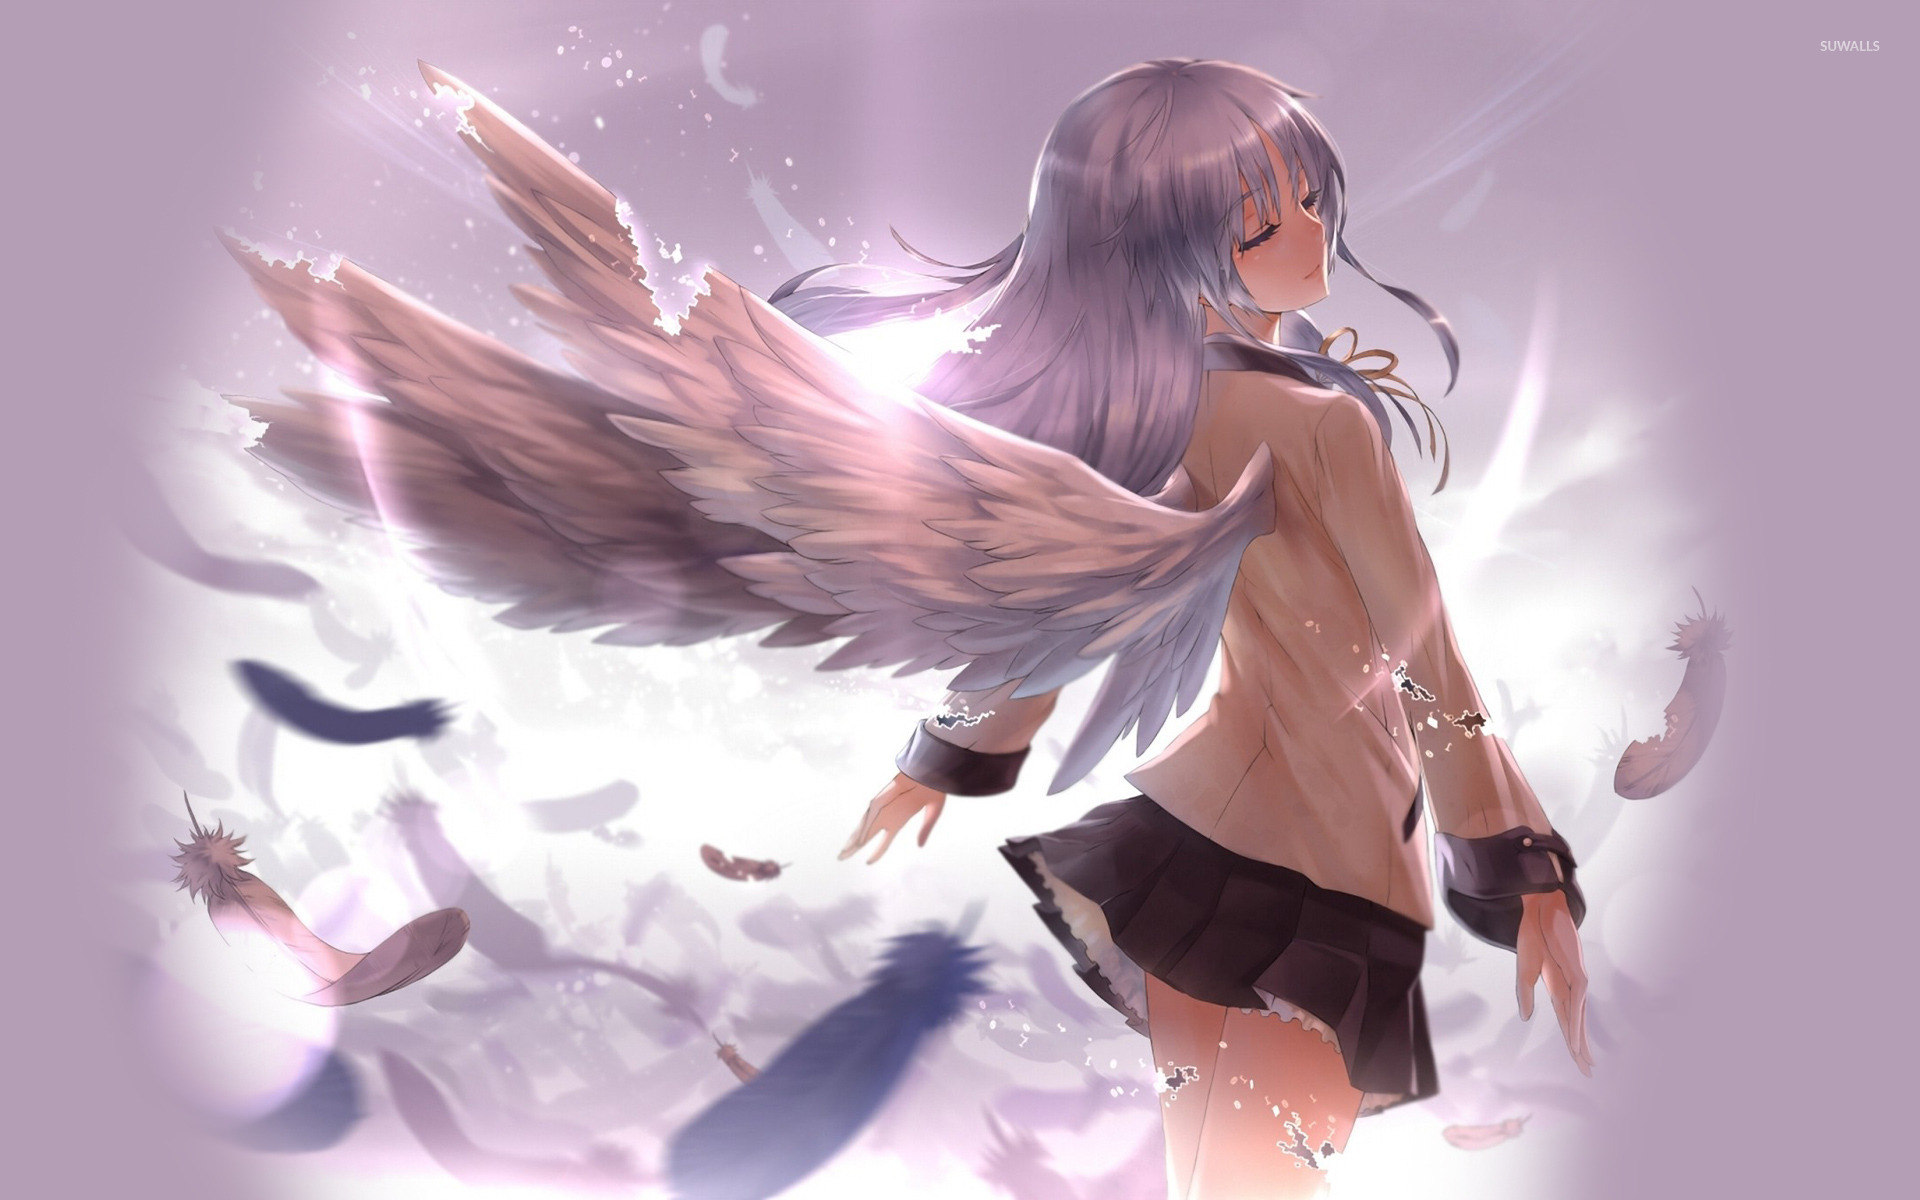 11 Angel Beats Wallpapers for iPhone and Android by Edward Warner